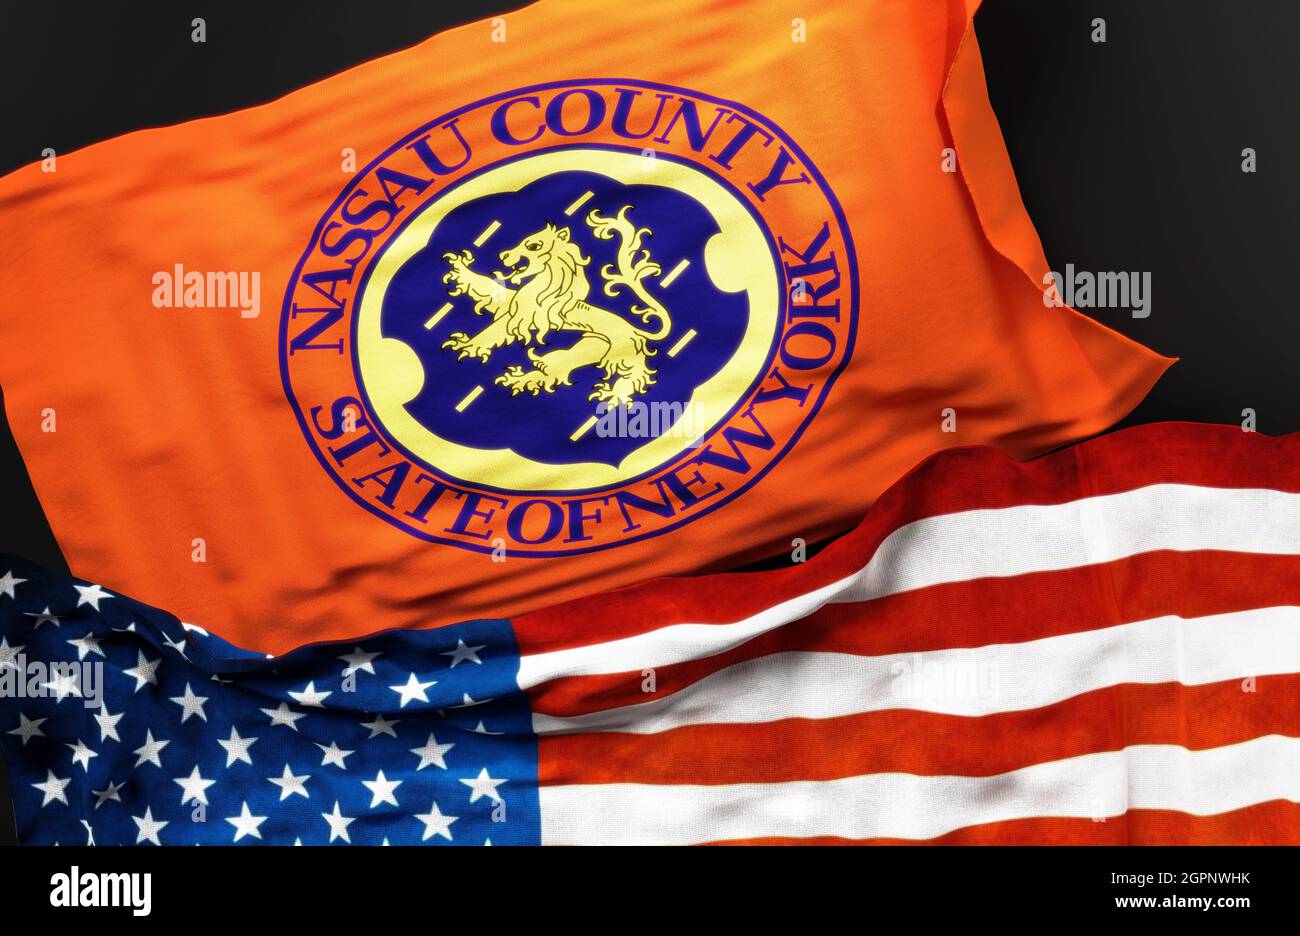 Flag of Nassau County New York along with a flag of the United States of America as a symbol of unity between them, 3d illustration Stock Photo